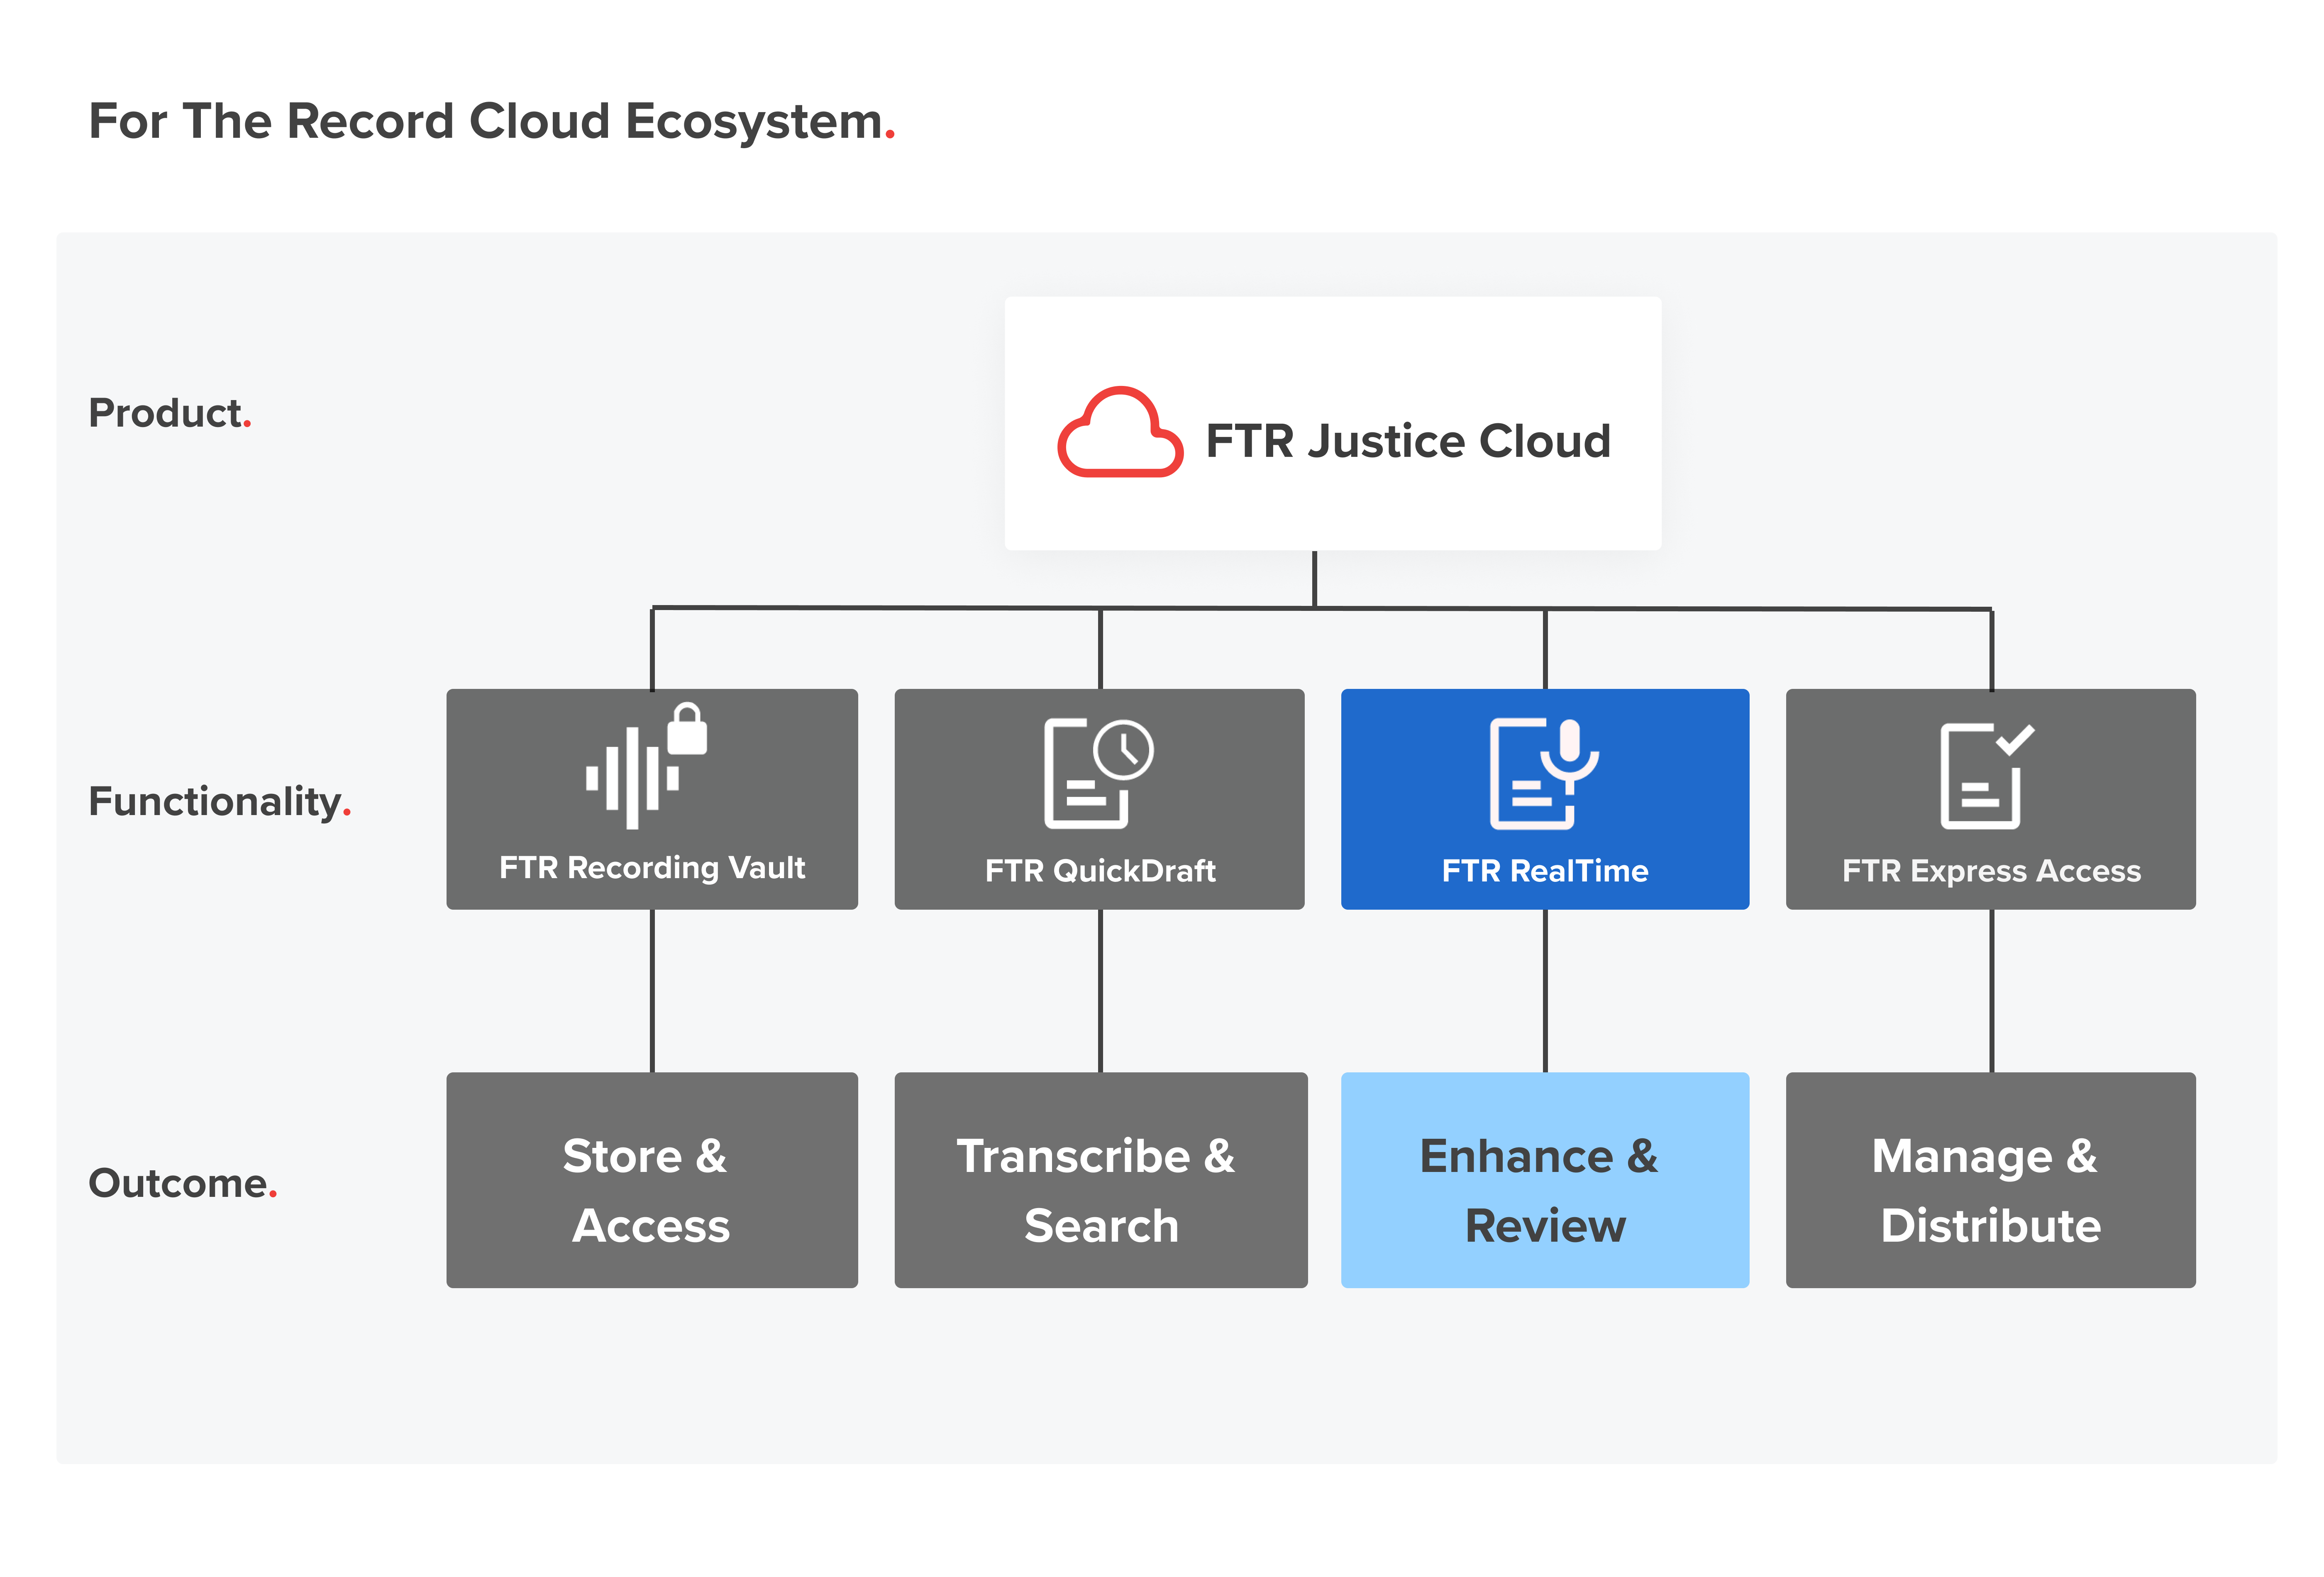 For The Record's Cloud Ecosystem, highlighting FTR RealTime